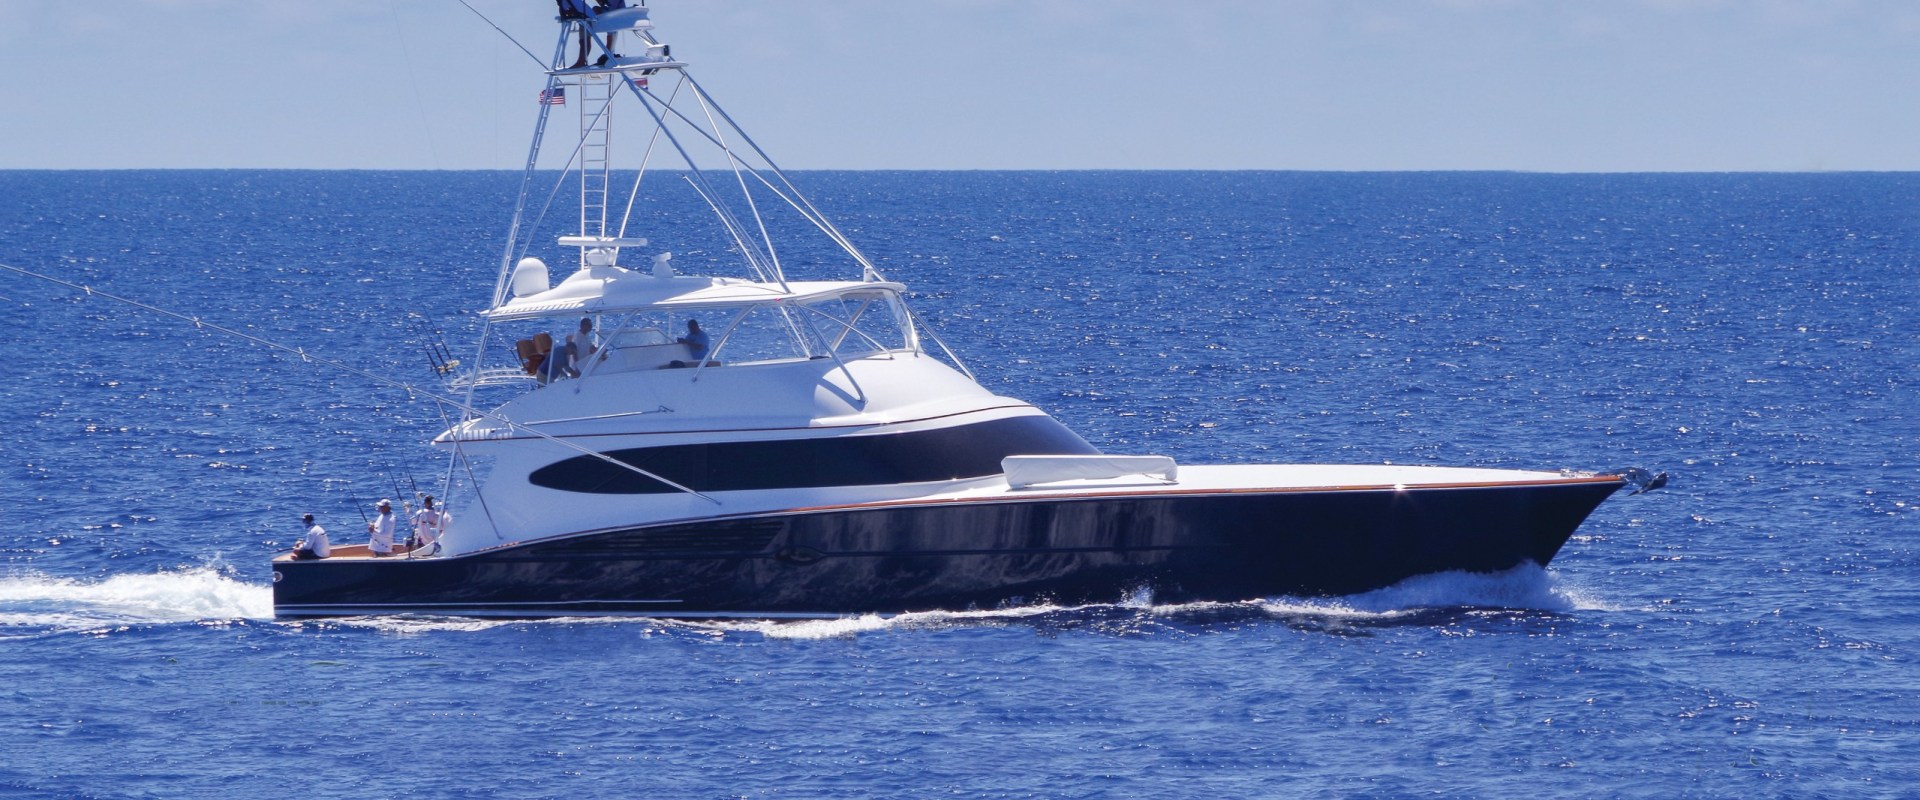 Are fishing charters profitable?